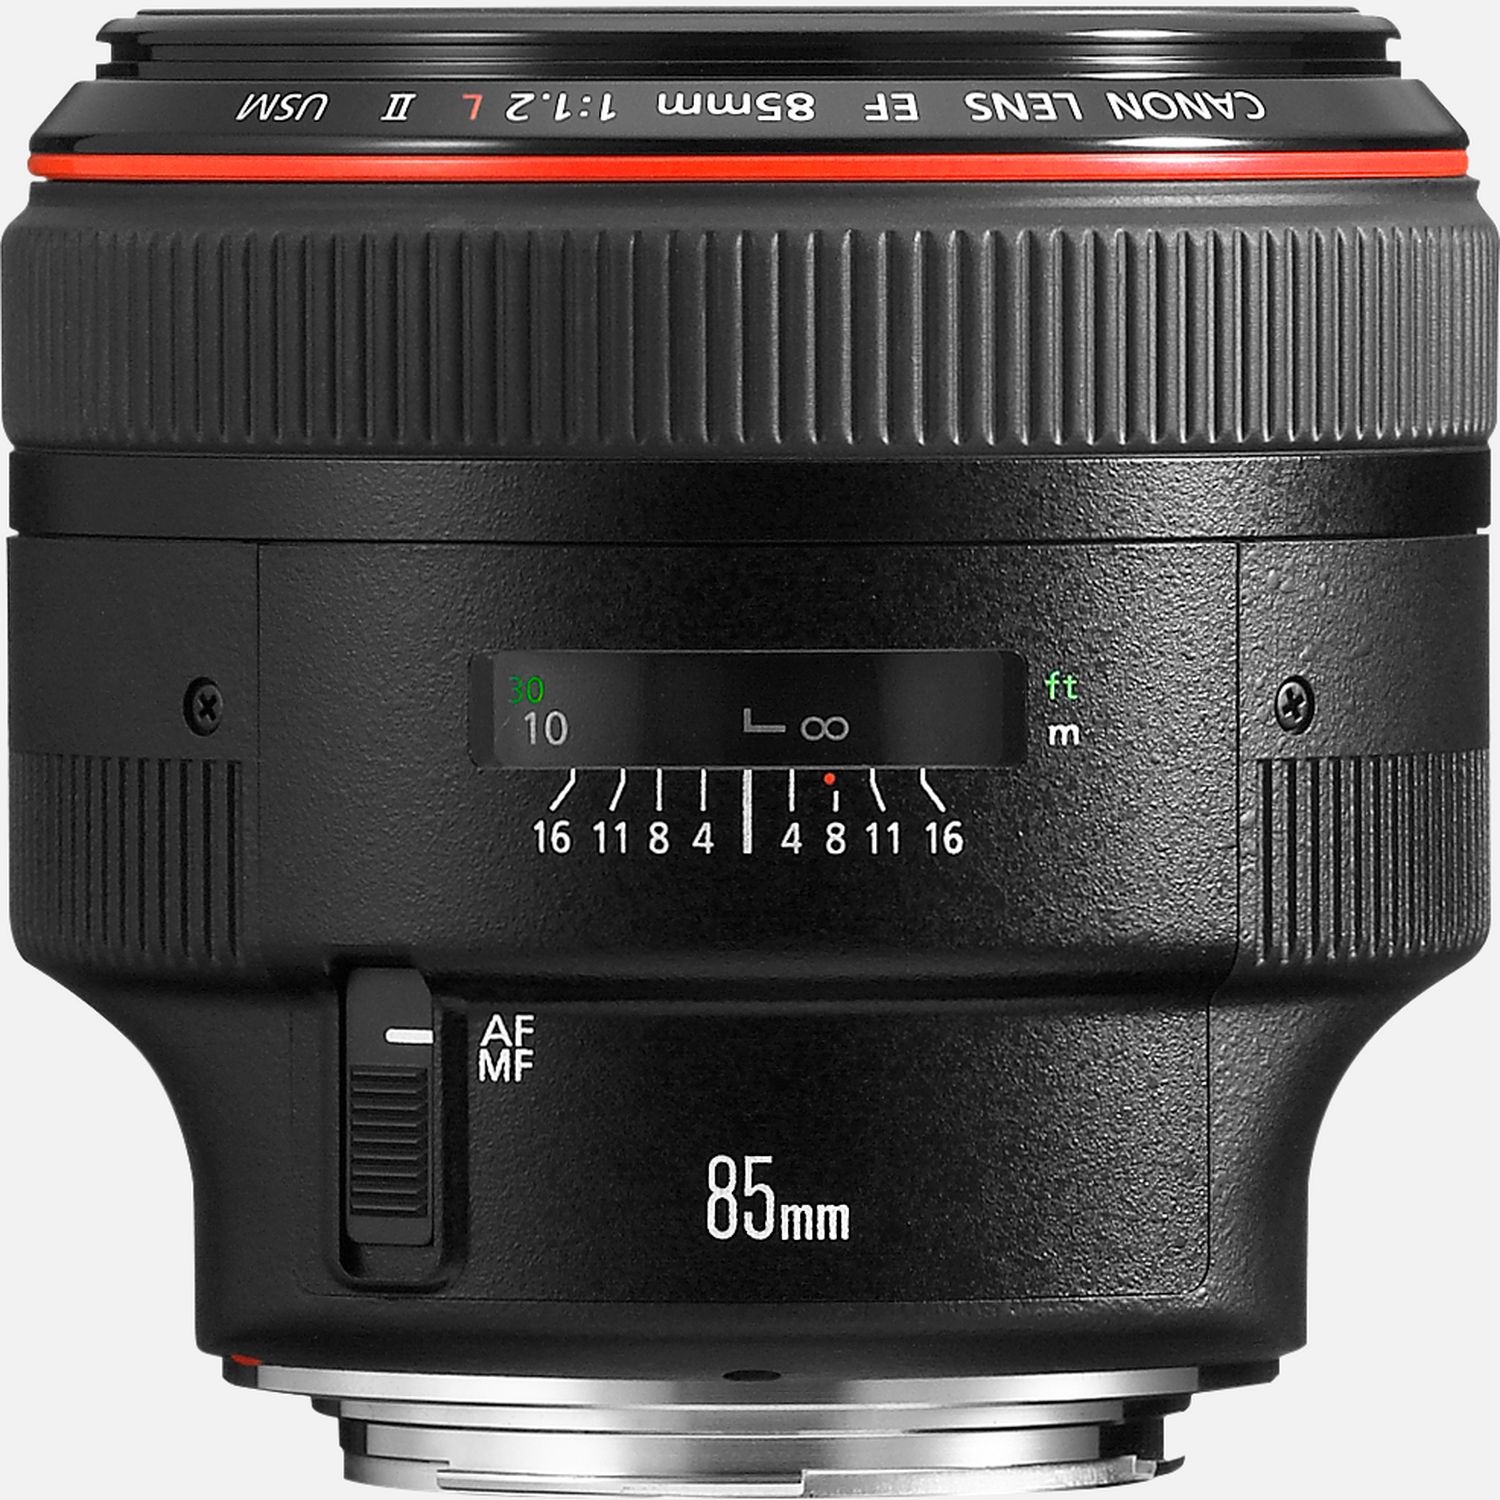 Canon EF 85mm f/1.2L II USM Lens in Telephoto Lenses at Canon